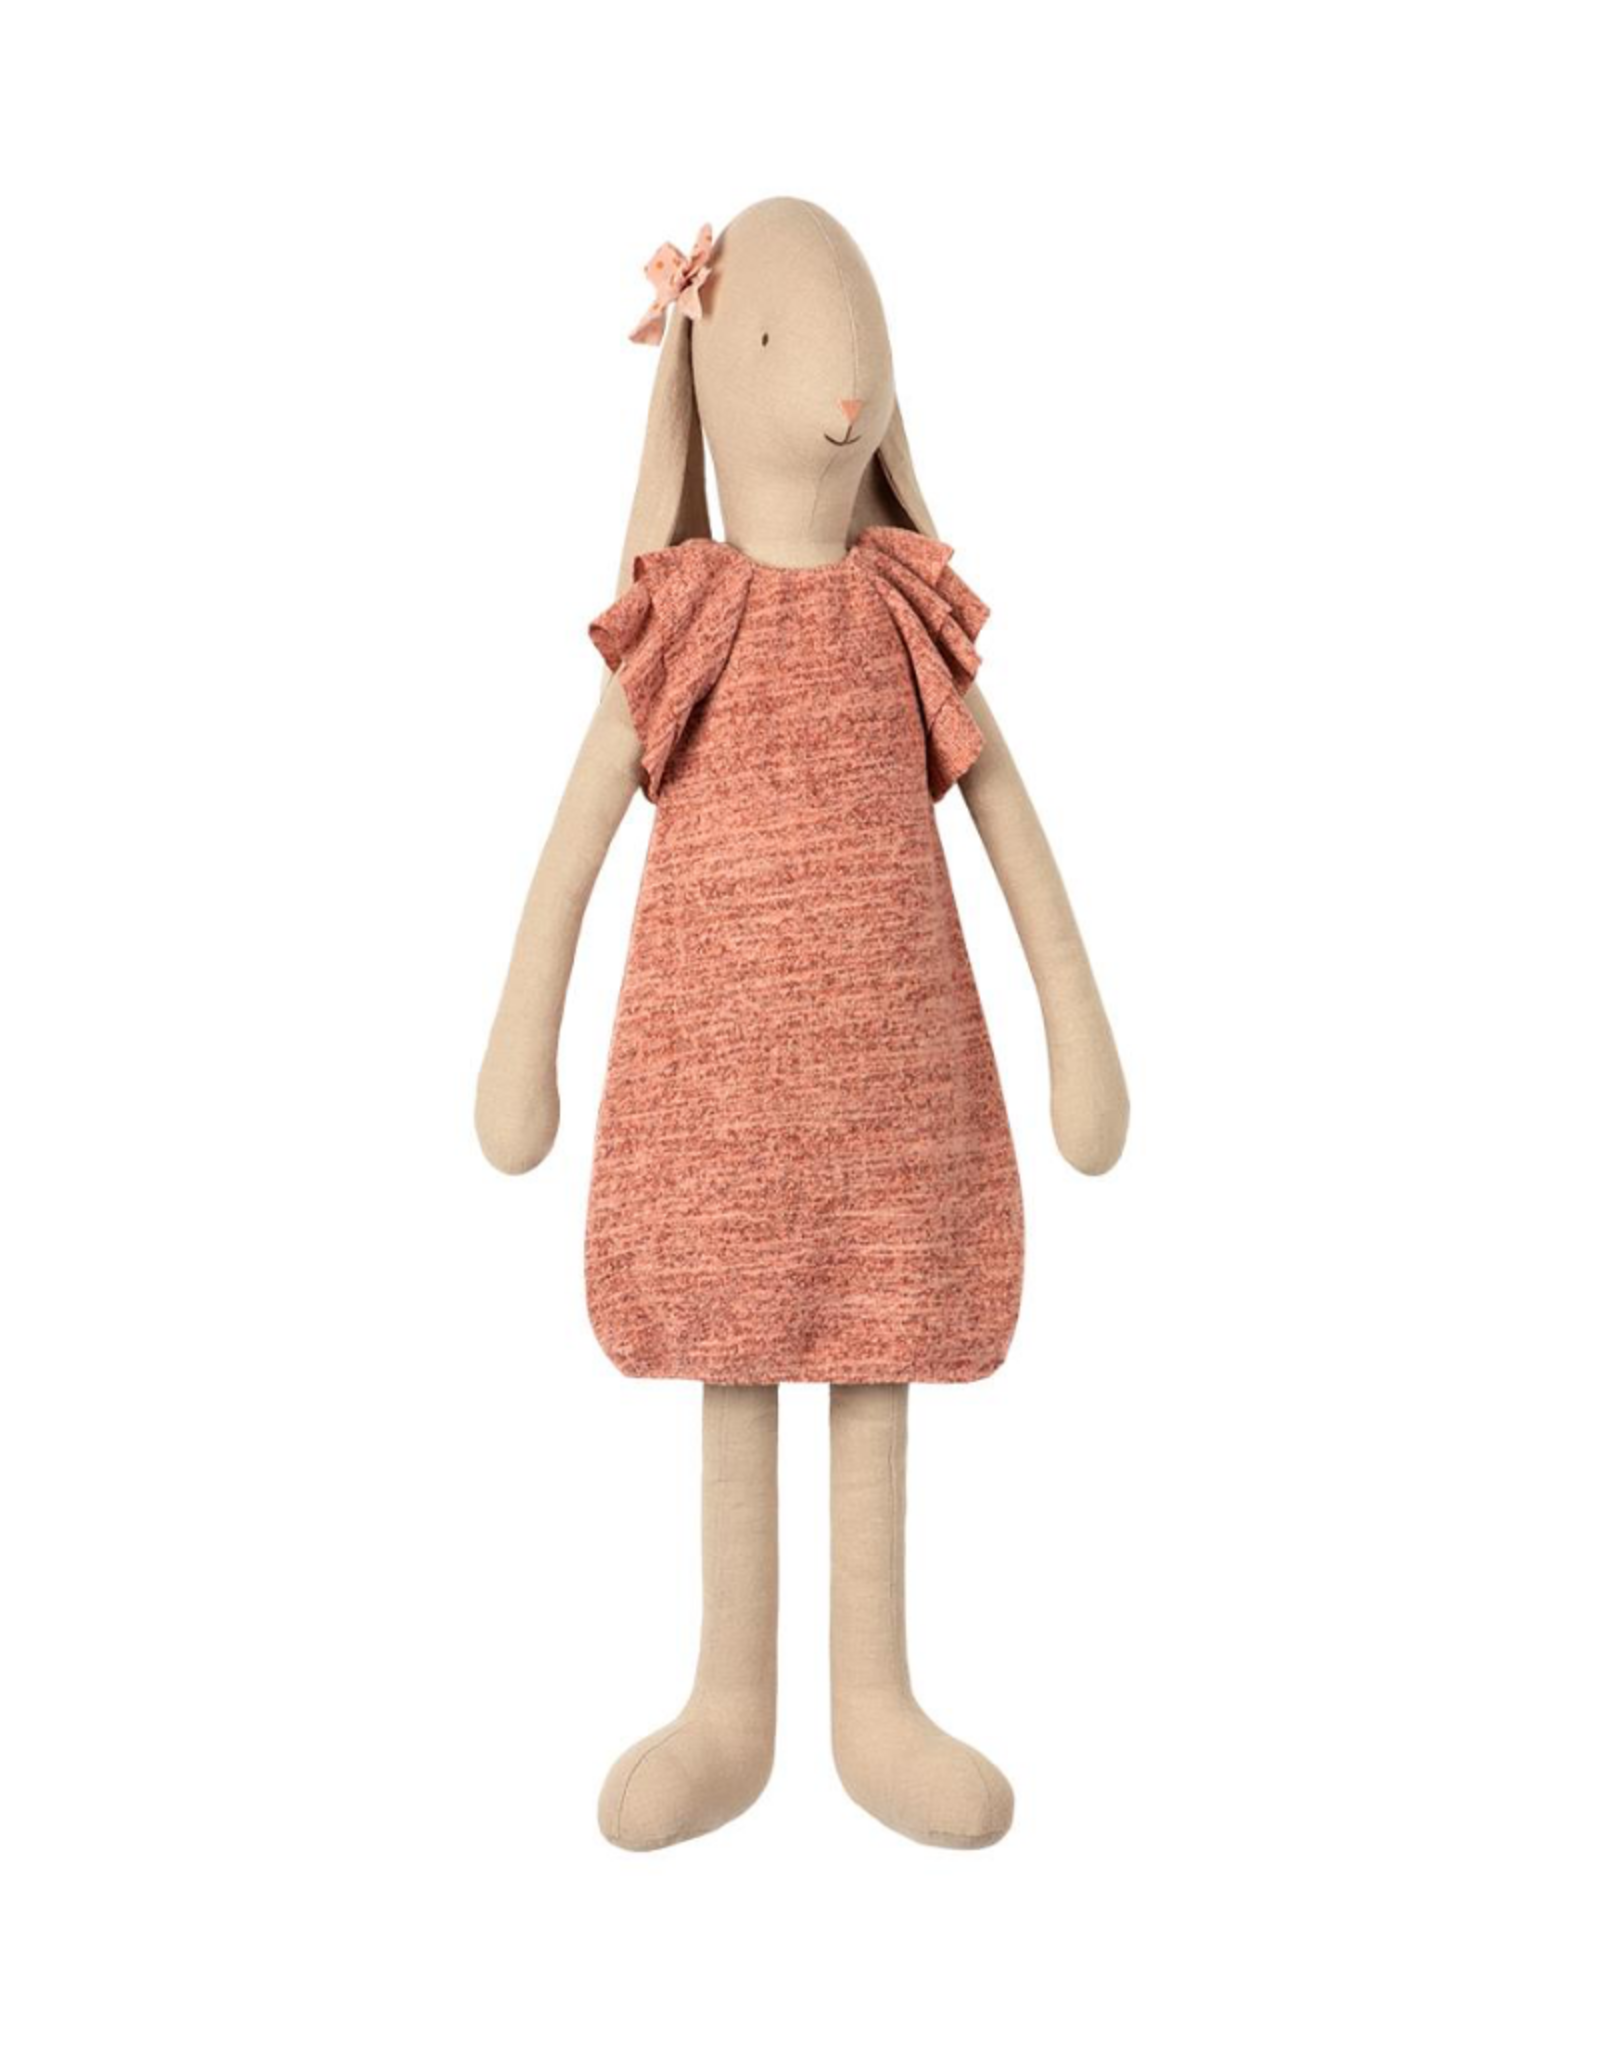 Knitted Dress Bunny - Size 5